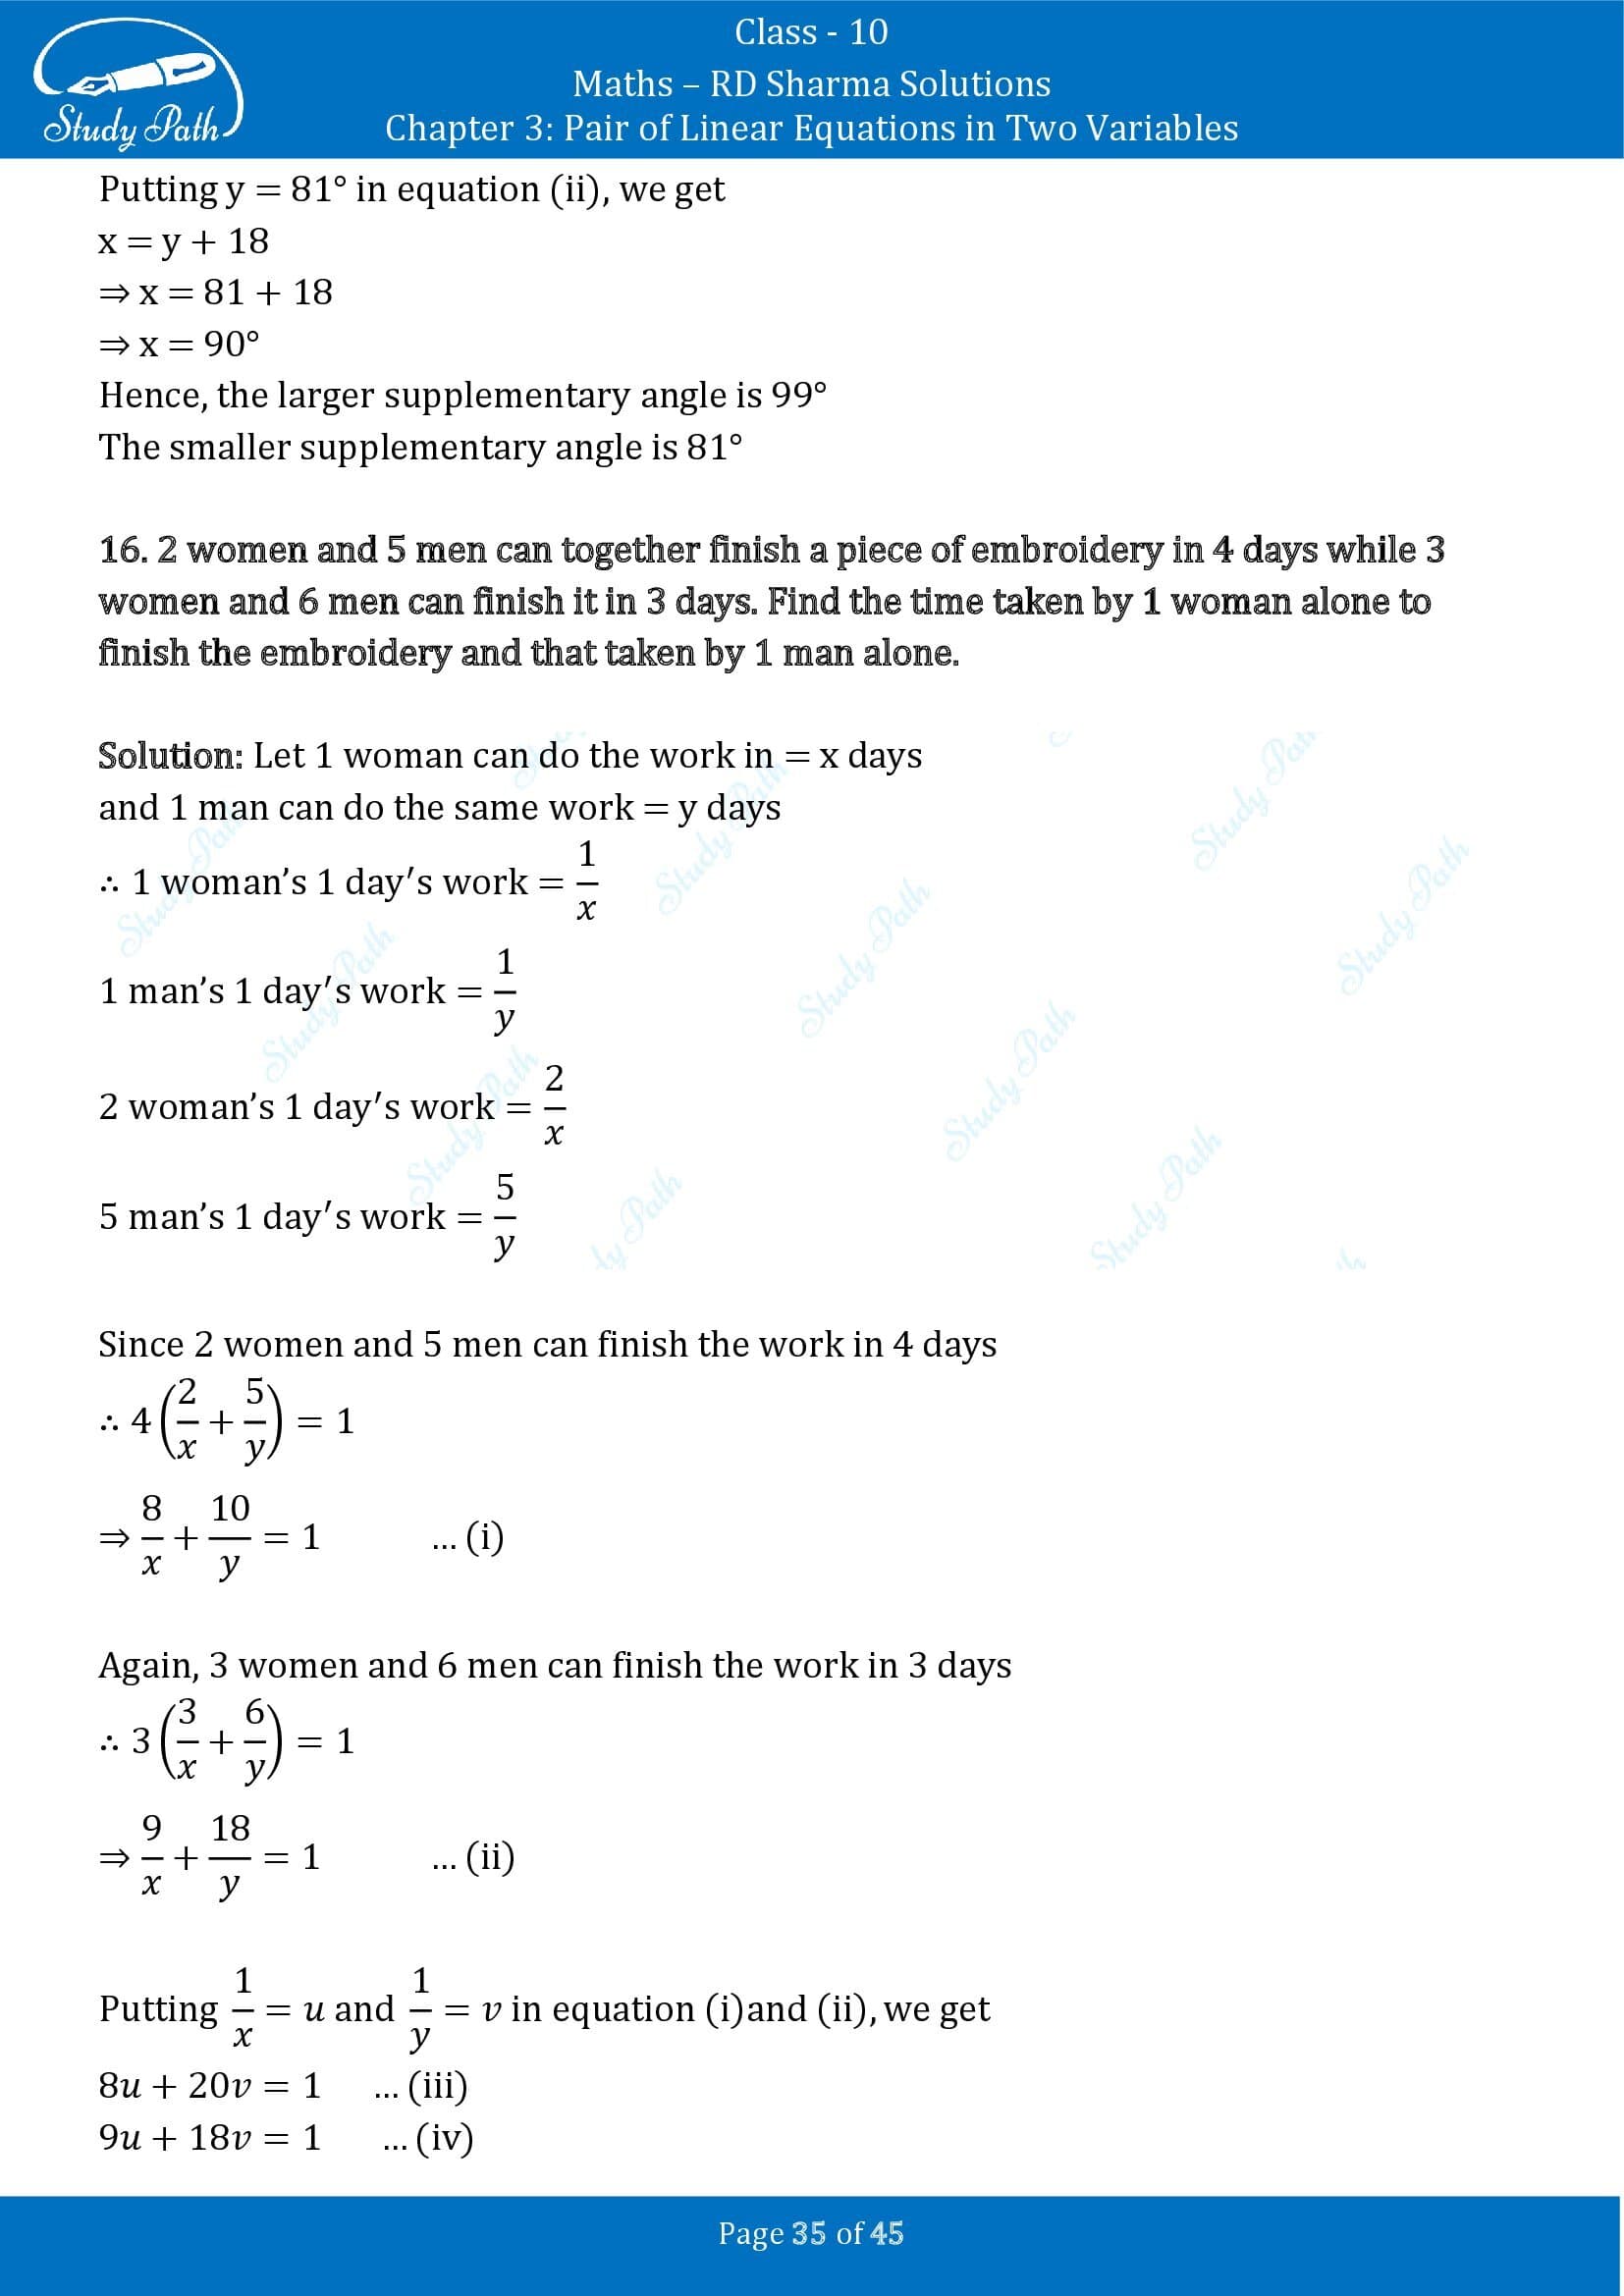 RD Sharma Solutions Class 10 Chapter 3 Pair of Linear Equations in Two Variables Exercise 3.11 00035